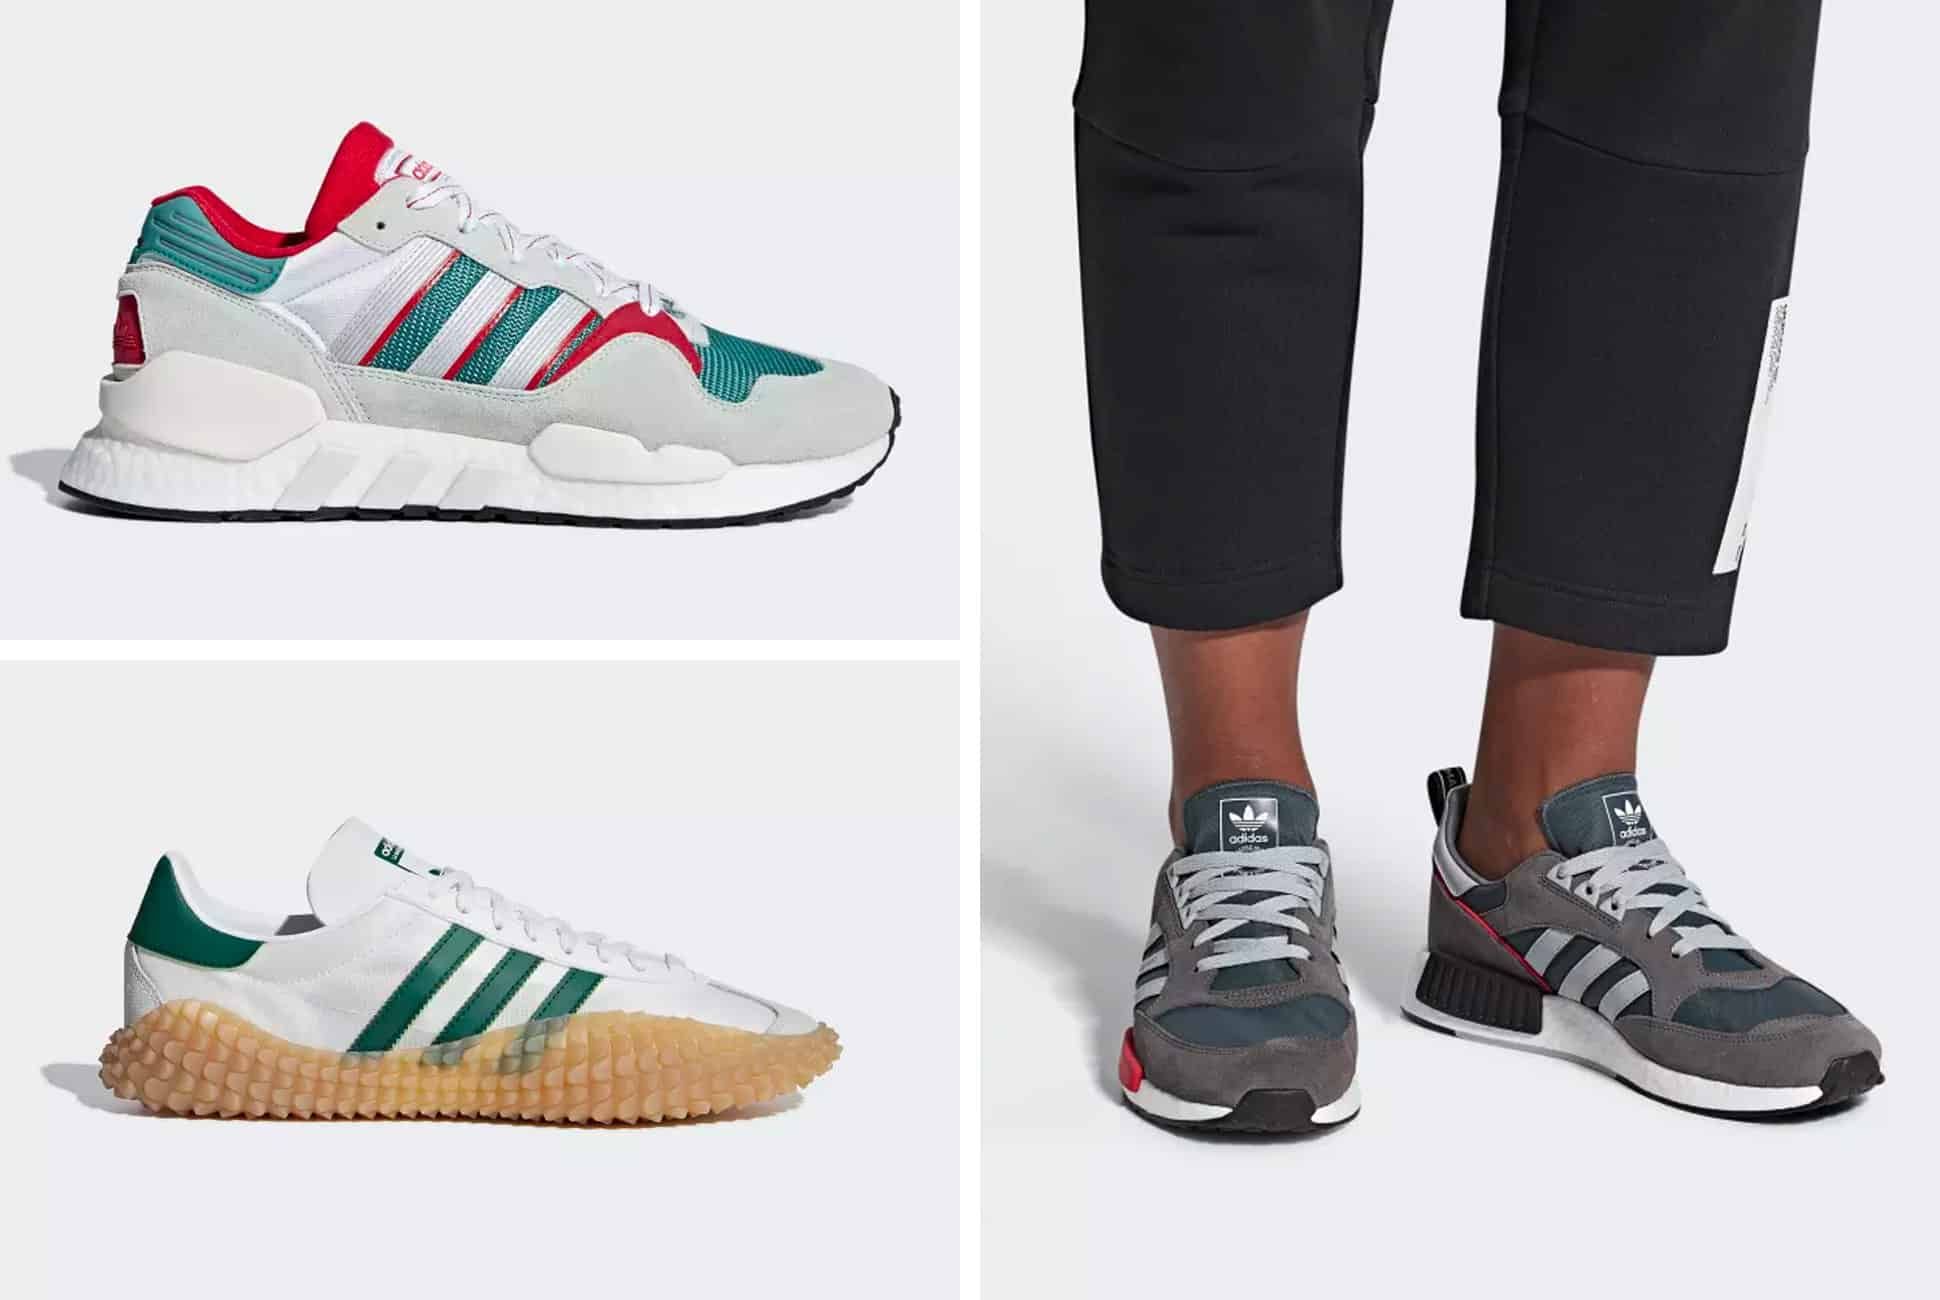 adidas most iconic shoes